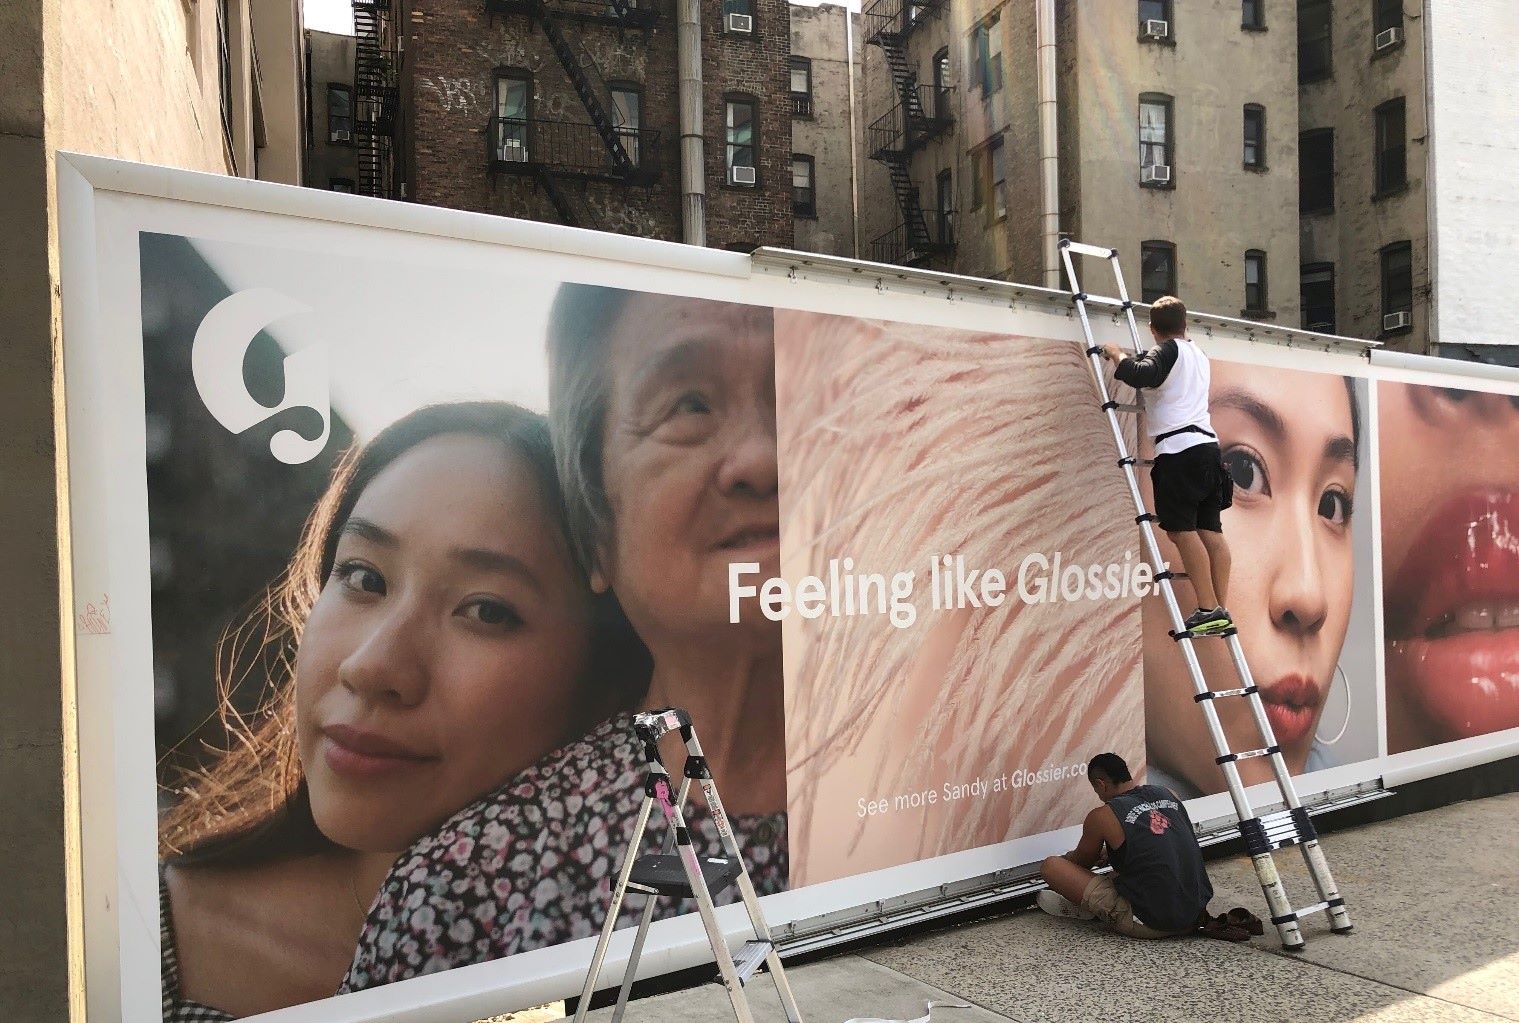 Emily Weiss's Glossier brand display in New York